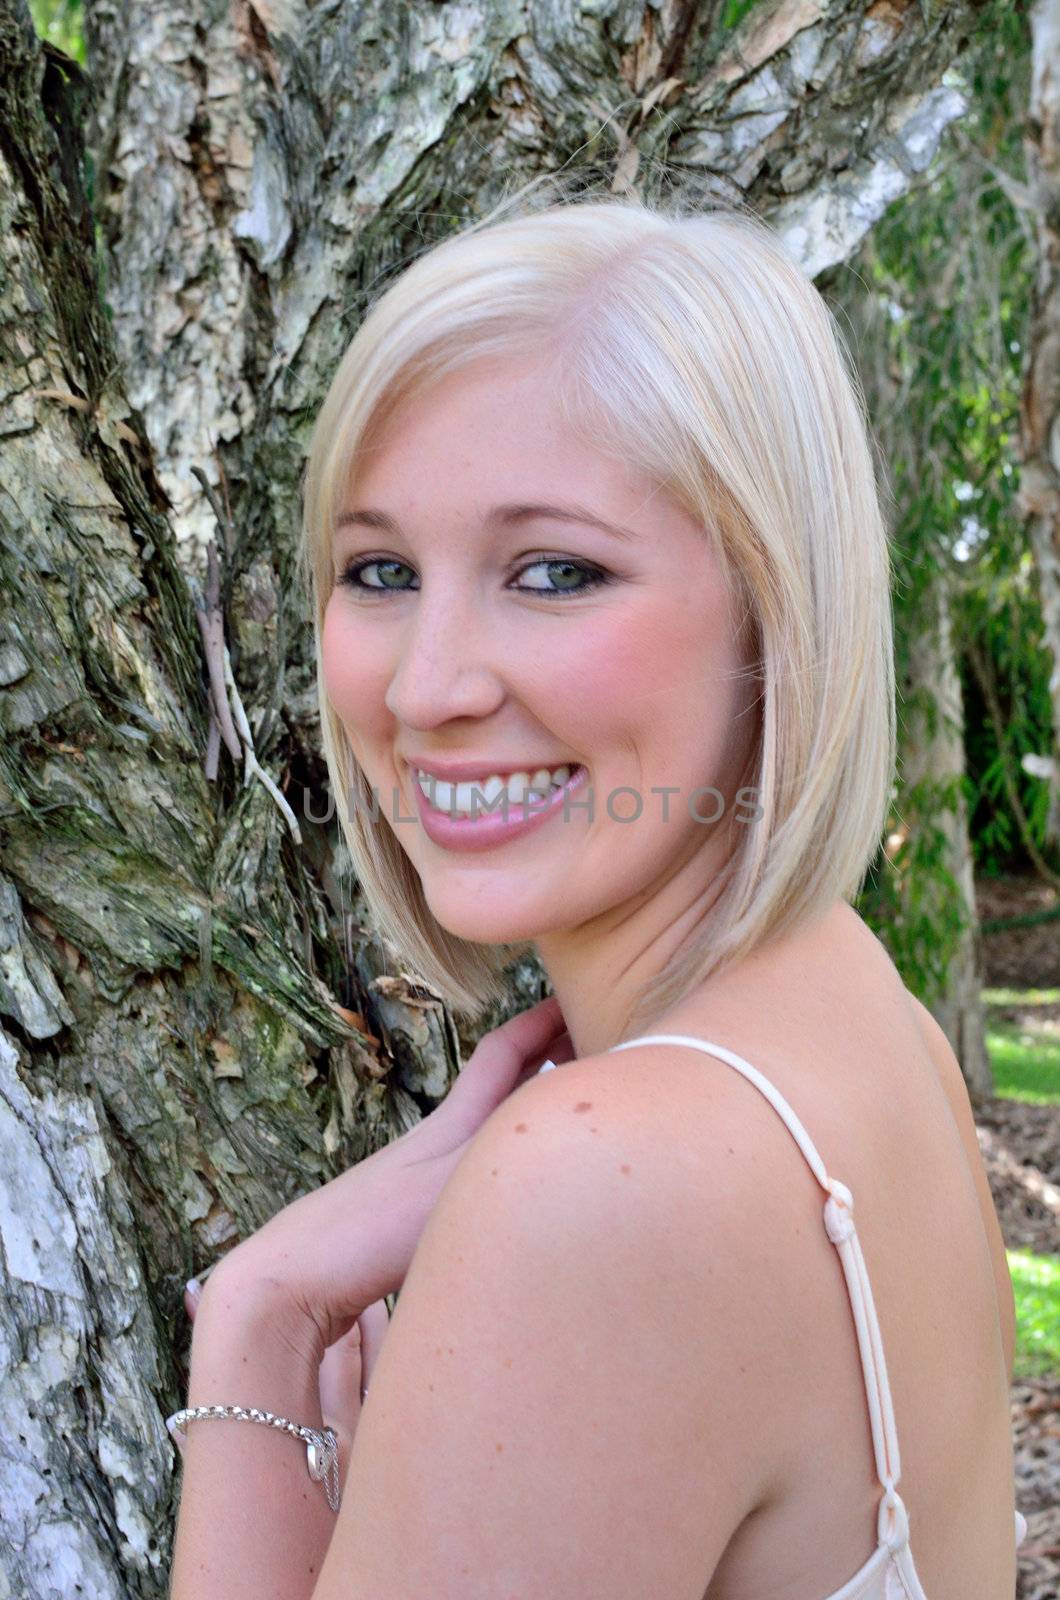 Attractive young lady with smooth features contrasting against the roughness of the paperbark tree behind her